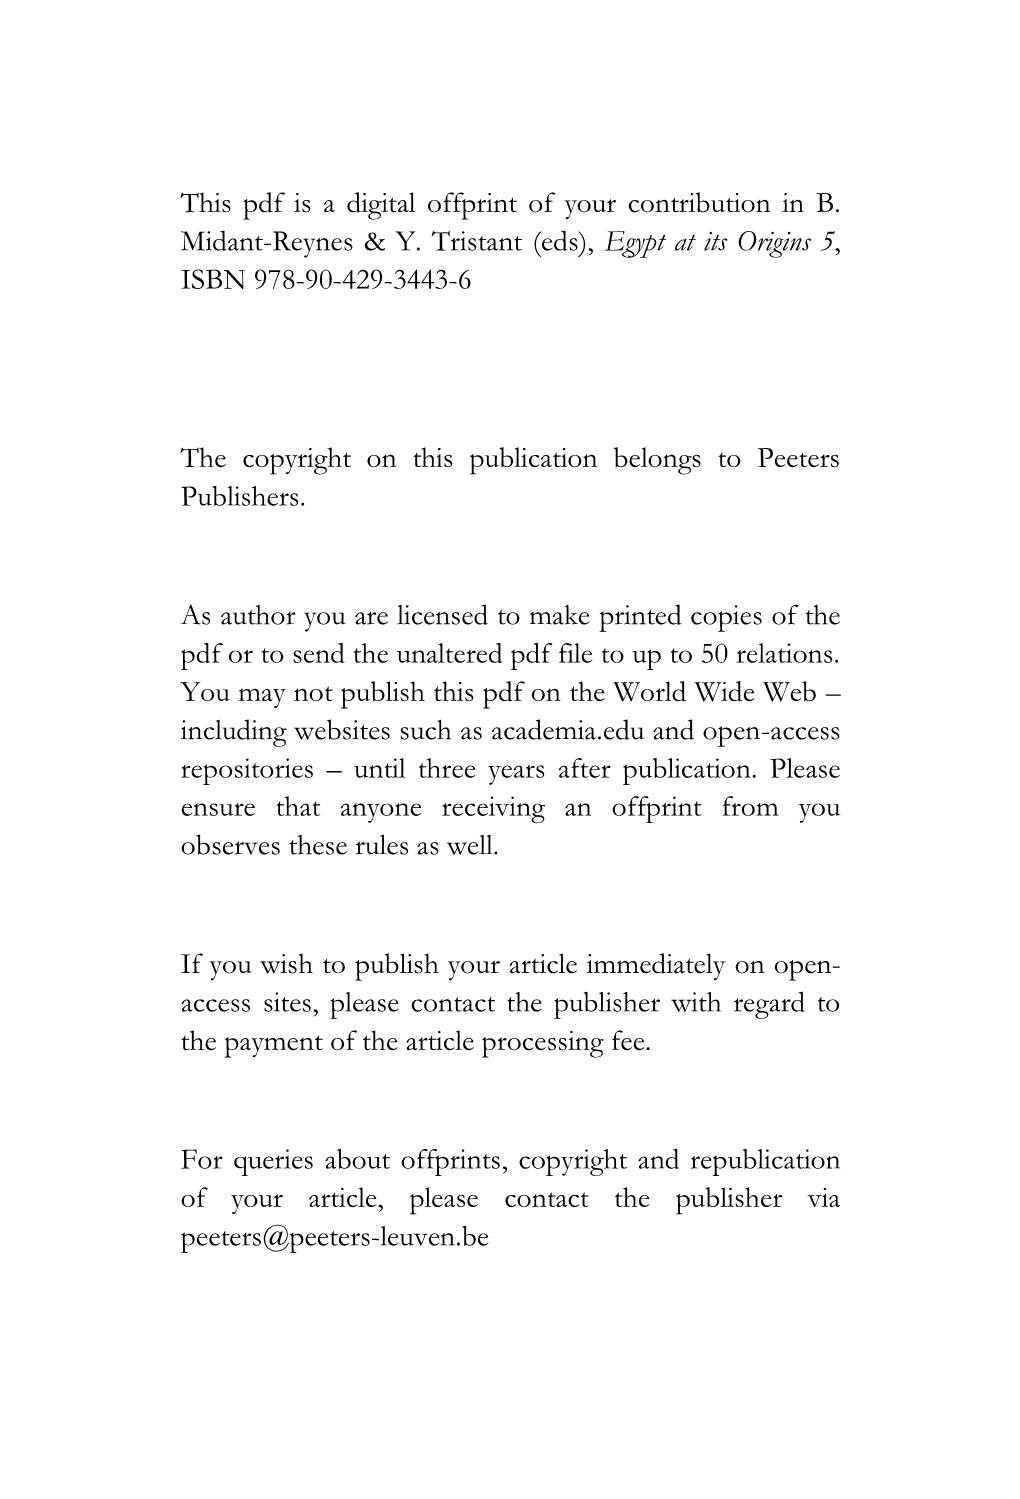 This Pdf Is a Digital Offprint of Your Contribution in B